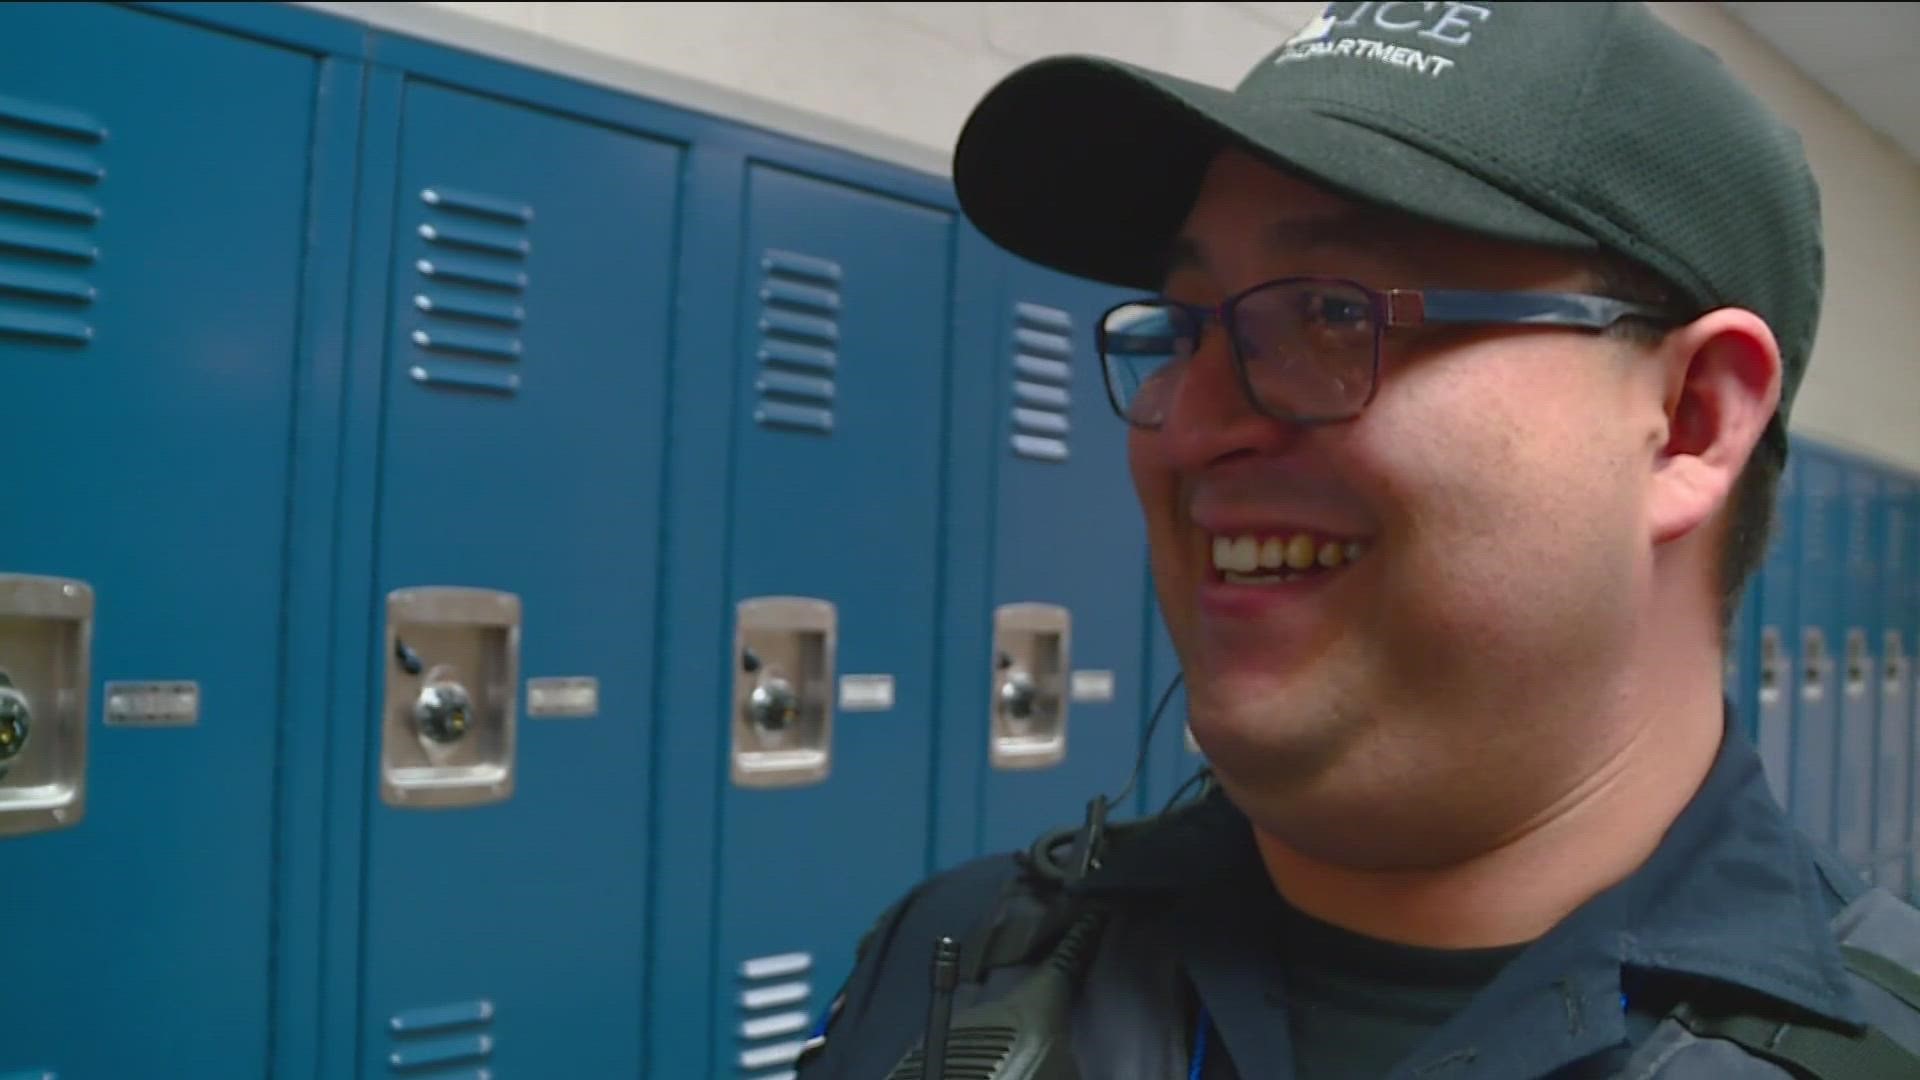 School resource officer Eric Resendez is now known as 'The Dancing SRO' in Caldwell. He says it was a great way to connect with the students.